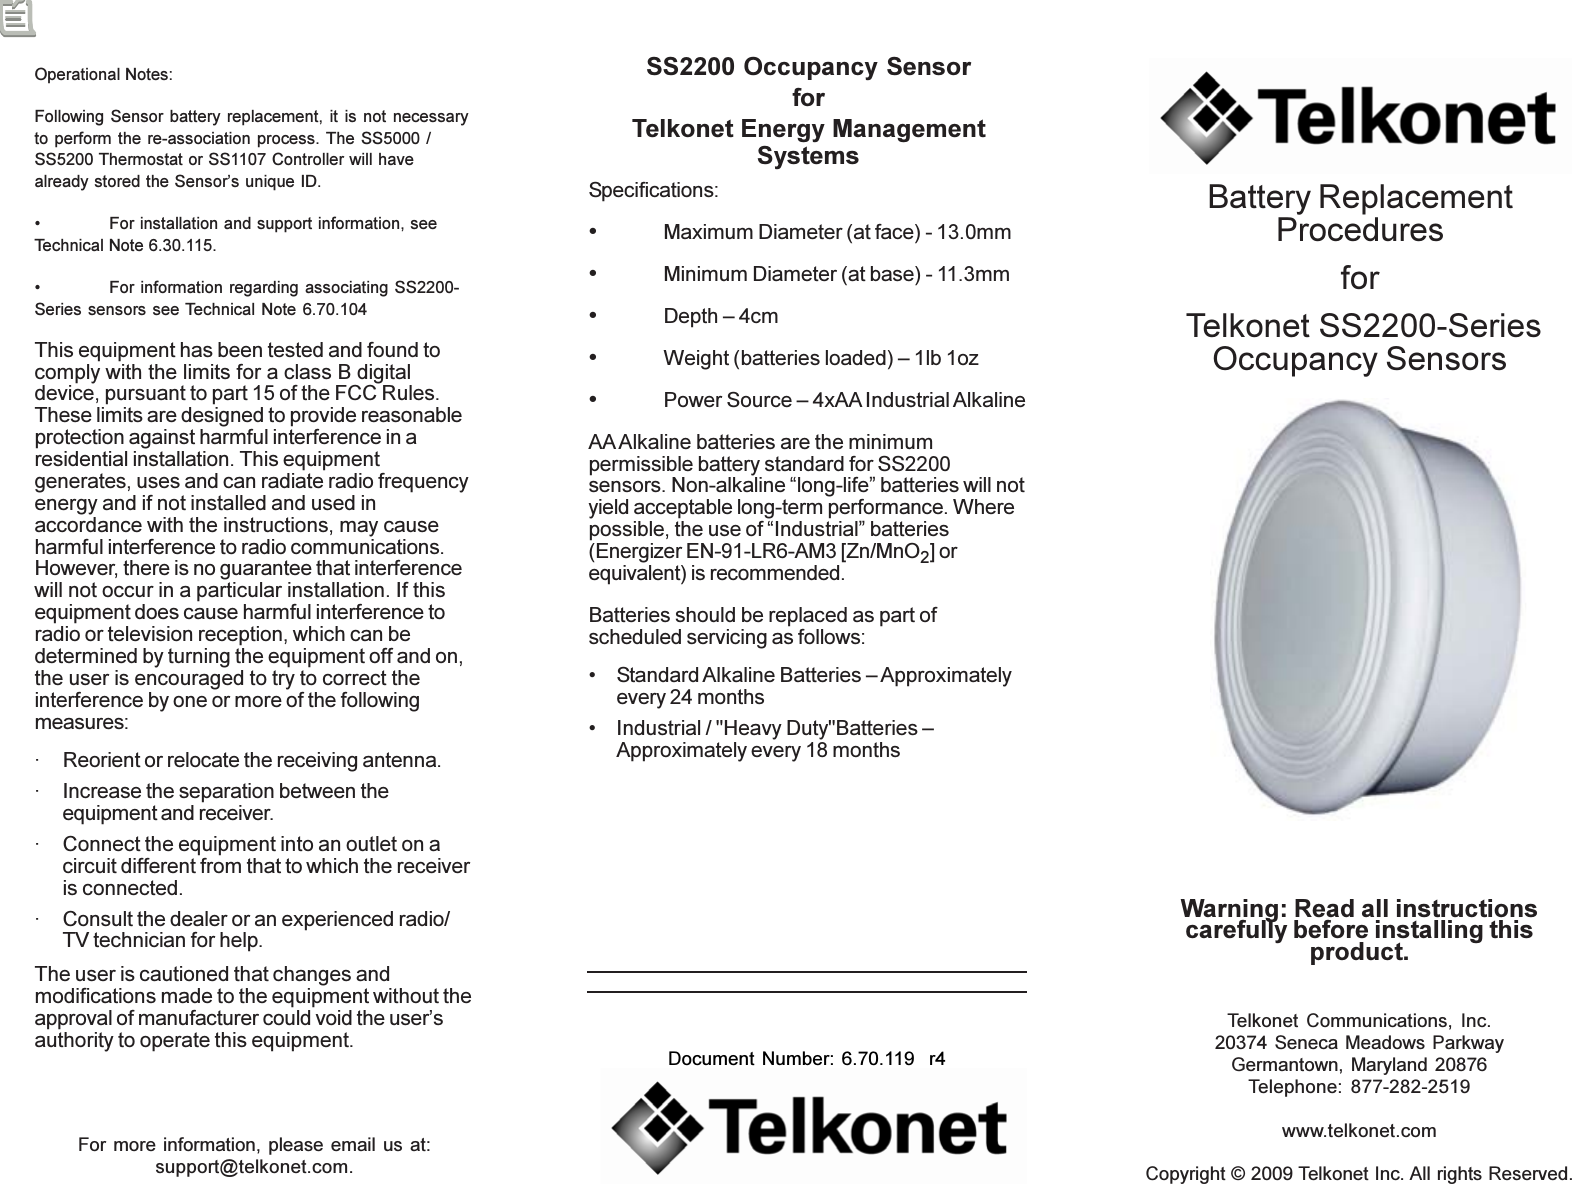 For more information, please email us at:support@telkonet.com.Telkonet Communications, Inc.20374 Seneca Meadows ParkwayGermantown, Maryland 20876Telephone: 877-282-2519www.telkonet.comCopyright © 2009 Telkonet Inc. All rights Reserved.Document Number: 6.70.119  r4Warning: Read all instructionscarefully before installing thisproduct.Battery ReplacementProceduresfor Telkonet SS2200-SeriesOccupancy SensorsSS2200 Occupancy SensorforTelkonet Energy ManagementSystemsSpecifications:•Maximum Diameter (at face) - 13.0mm•Minimum Diameter (at base) - 11.3mm•Depth – 4cm•Weight (batteries loaded) – 1lb 1oz•Power Source – 4xAA Industrial AlkalineAA Alkaline batteries are the minimumpermissible battery standard for SS2200sensors. Non-alkaline “long-life” batteries will notyield acceptable long-term performance. Wherepossible, the use of “Industrial” batteries(Energizer EN-91-LR6-AM3 [Zn/MnO2] orequivalent) is recommended.Batteries should be replaced as part ofscheduled servicing as follows:• Standard Alkaline Batteries – Approximatelyevery 24 months• Industrial / &quot;Heavy Duty&quot;Batteries –Approximately every 18 monthsOperational Notes:Following Sensor battery replacement, it is not necessaryto perform the re-association process. The SS5000 /SS5200 Thermostat or SS1107 Controller will havealready stored the Sensor’s unique ID.• For installation and support information, seeTechnical Note 6.30.115.• For information regarding associating SS2200-Series sensors see Technical Note 6.70.104This equipment has been tested and found tocomply with the limits for a class B digitaldevice, pursuant to part 15 of the FCC Rules.These limits are designed to provide reasonableprotection against harmful interference in aresidential installation. This equipmentgenerates, uses and can radiate radio frequencyenergy and if not installed and used inaccordance with the instructions, may causeharmful interference to radio communications.However, there is no guarantee that interferencewill not occur in a particular installation. If thisequipment does cause harmful interference toradio or television reception, which can bedetermined by turning the equipment off and on,the user is encouraged to try to correct theinterference by one or more of the followingmeasures:· Reorient or relocate the receiving antenna.· Increase the separation between theequipment and receiver.· Connect the equipment into an outlet on acircuit different from that to which the receiveris connected.· Consult the dealer or an experienced radio/TV technician for help.The user is cautioned that changes andmodifications made to the equipment without theapproval of manufacturer could void the user’sauthority to operate this equipment.